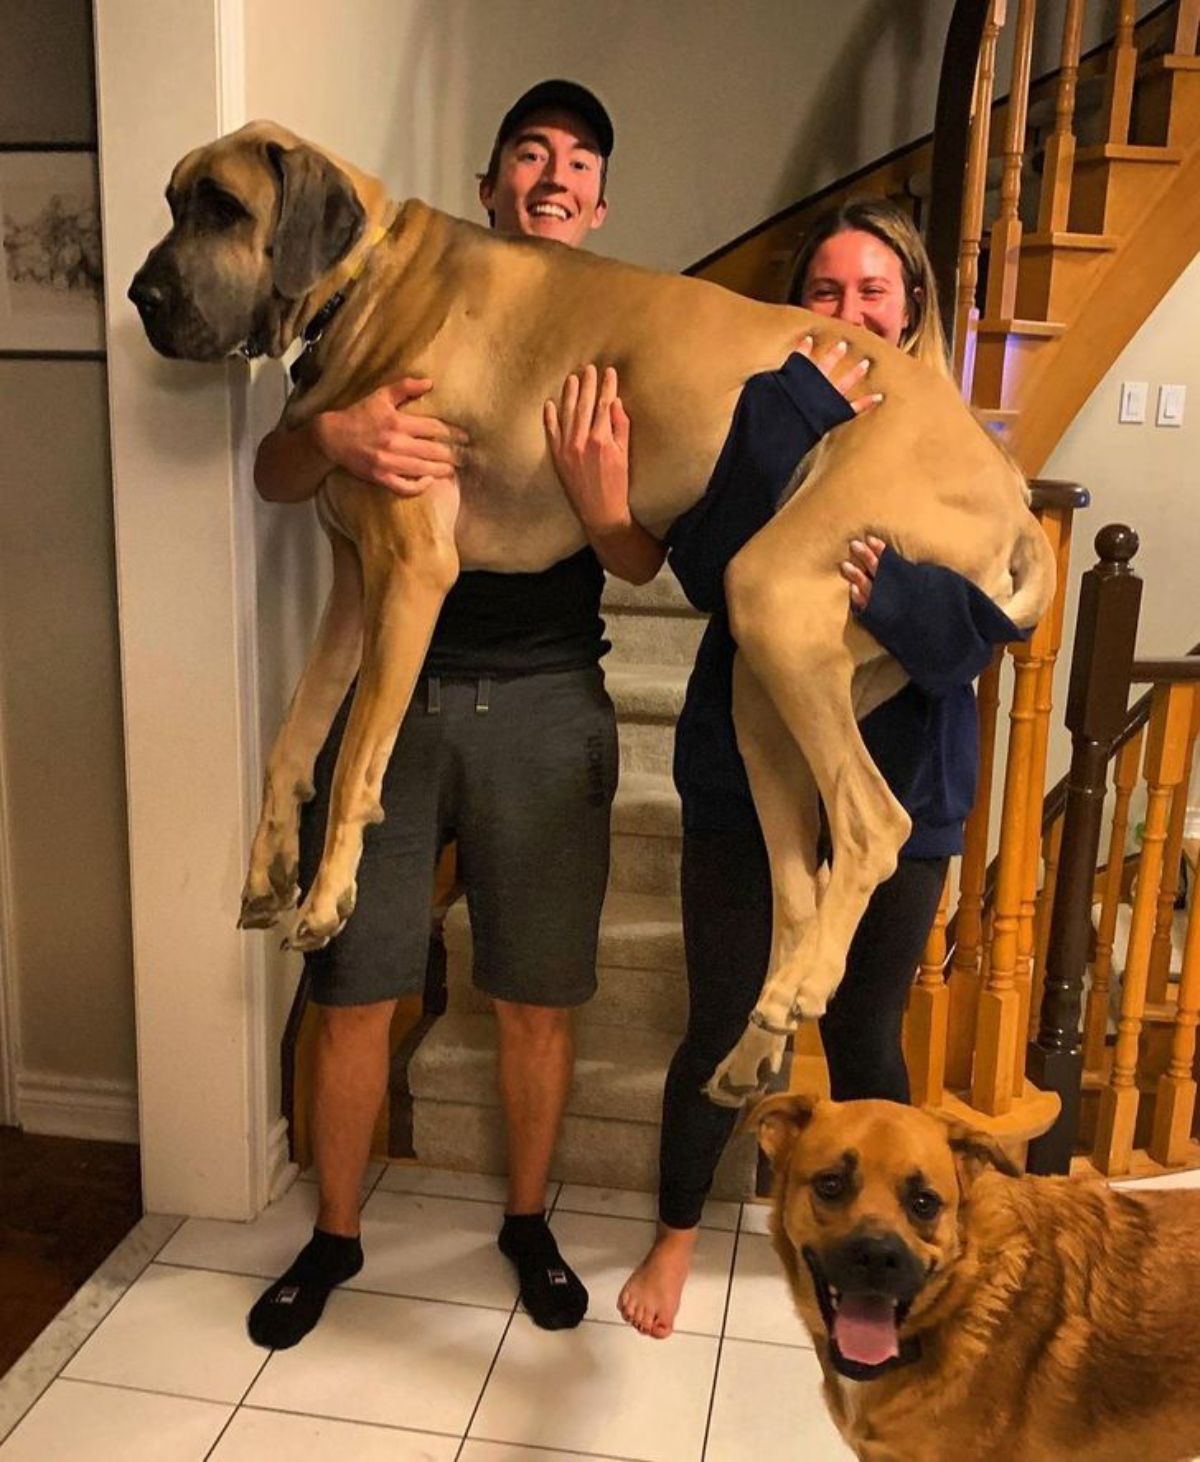 large brown mastiff being held up by a man and a woman with another brown dog on the floor